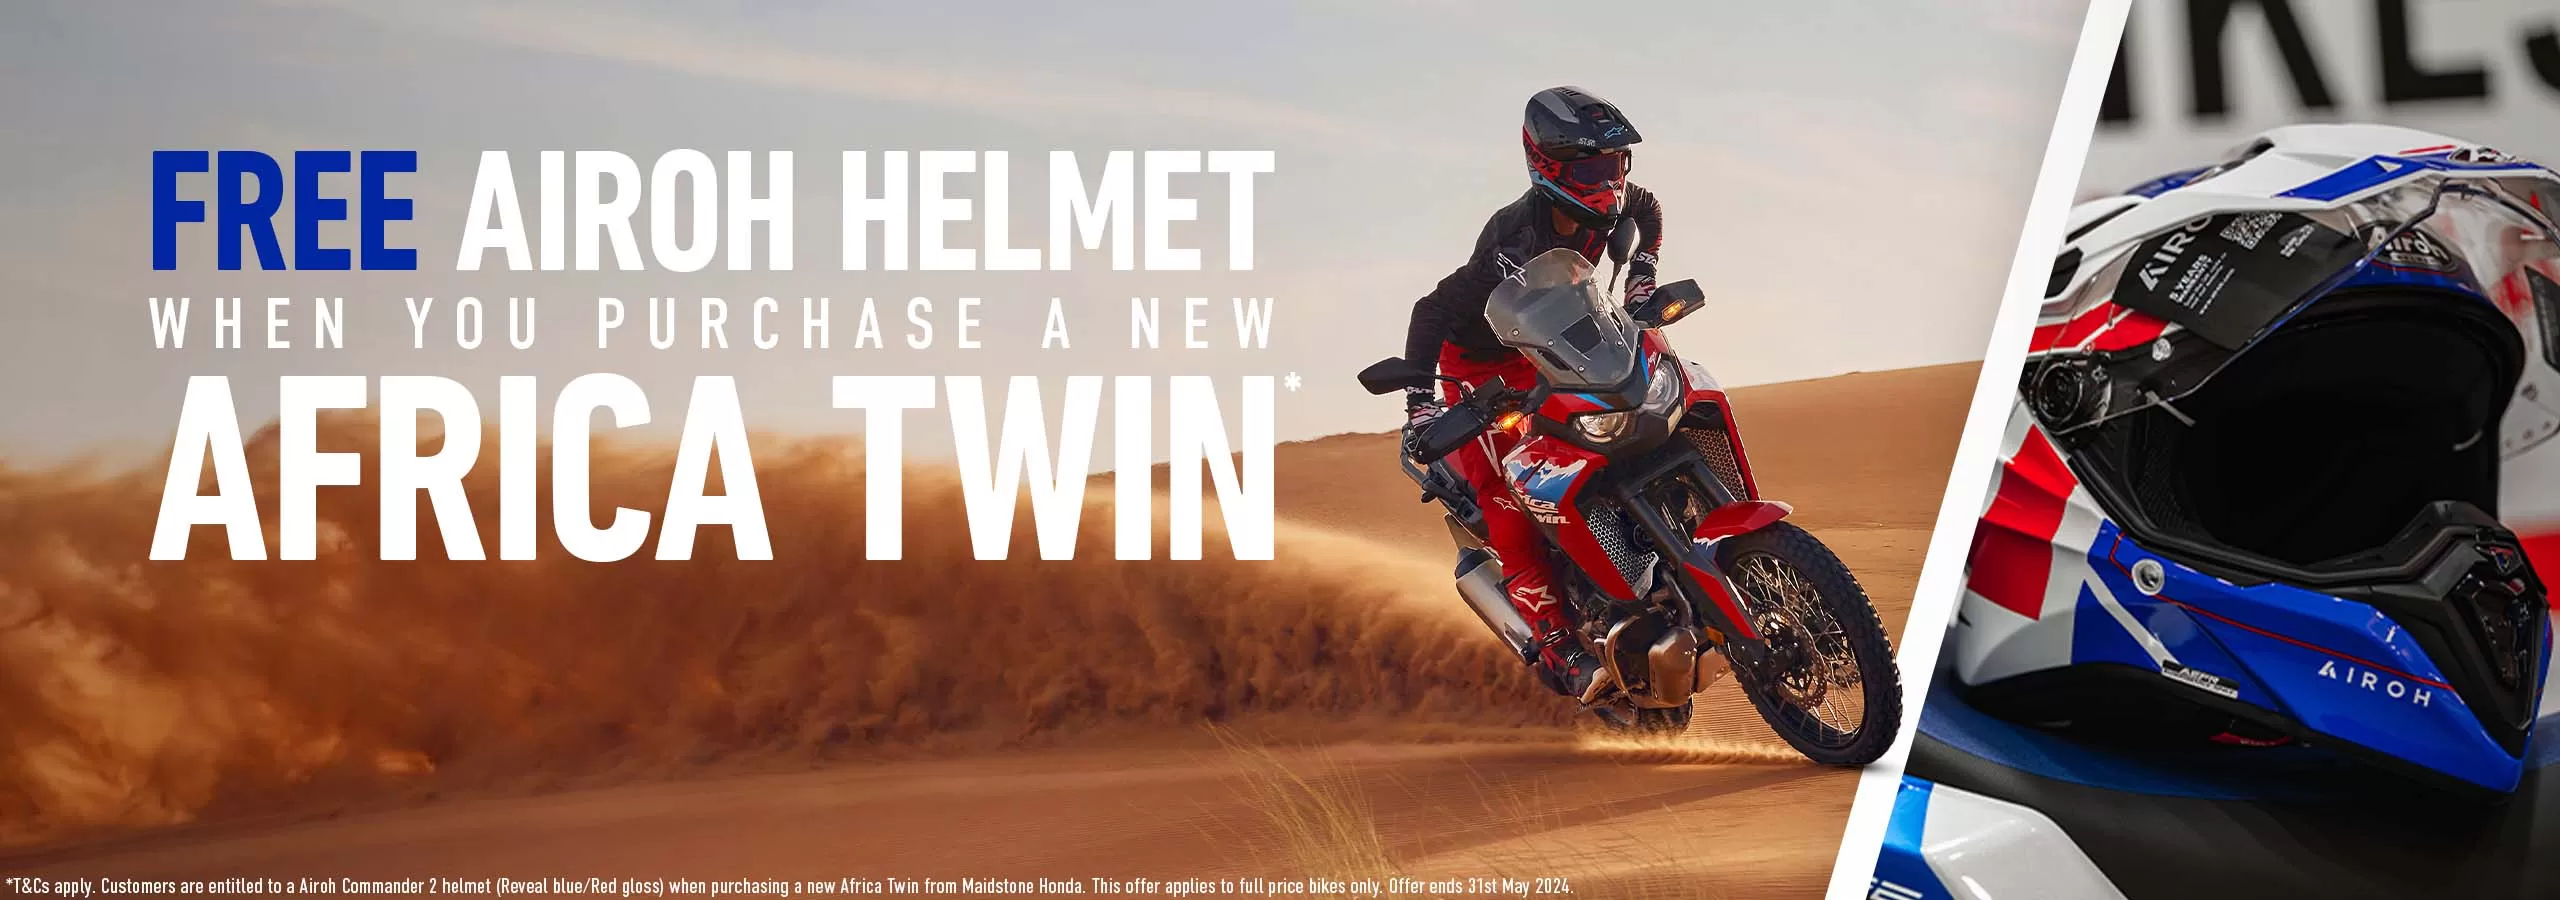 Honda Africa Twin & Airoh Helmet. Find Out More >